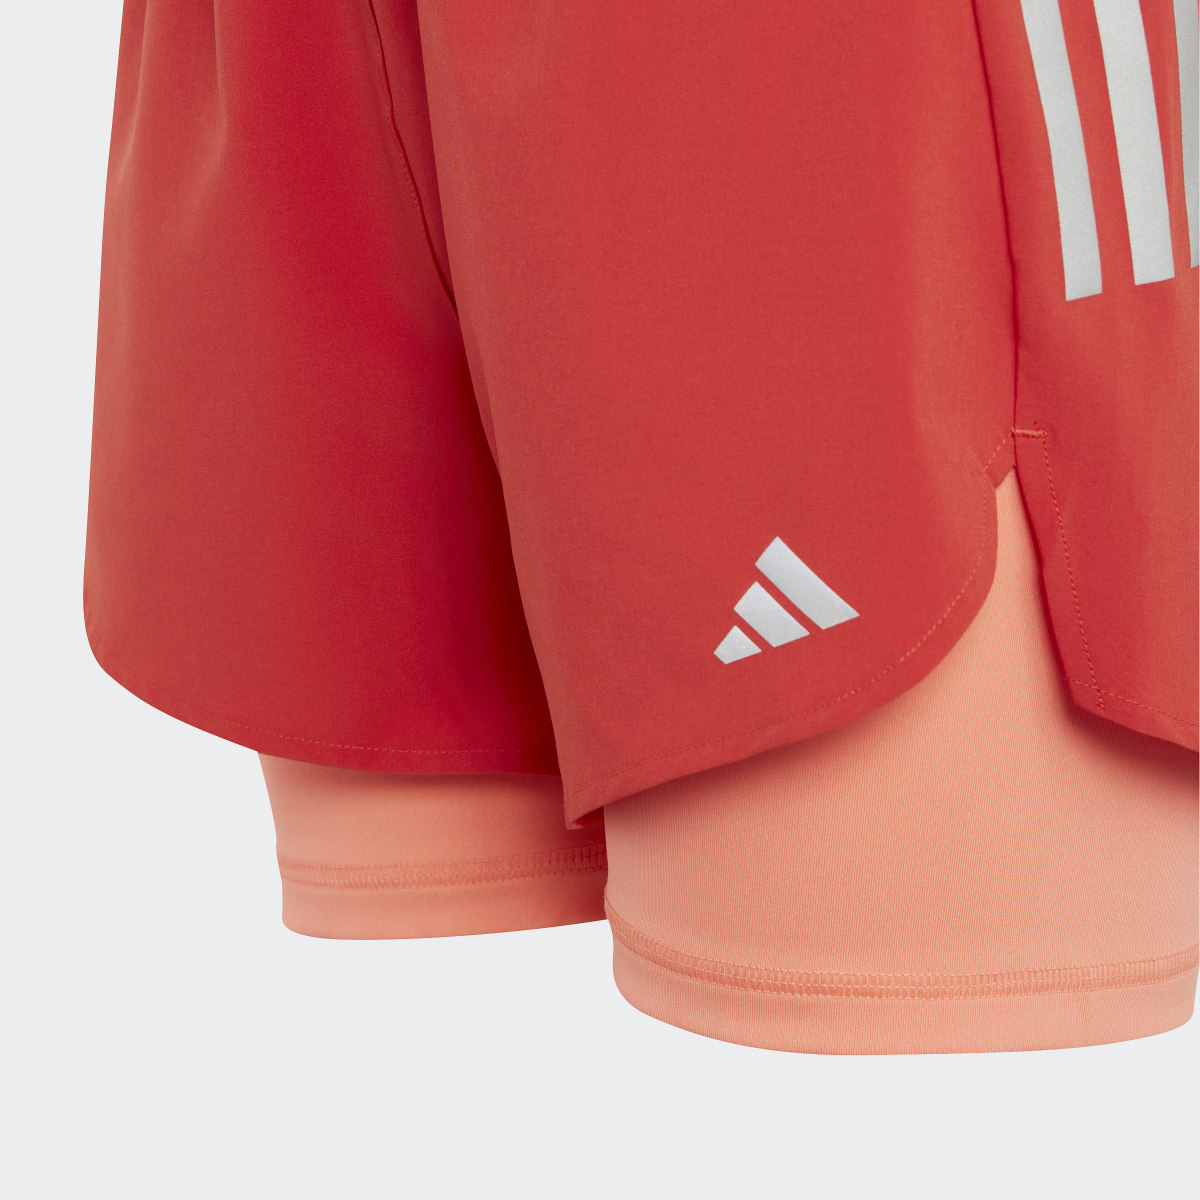 Adidas Short Two-In-One AEROREADY Woven. 5